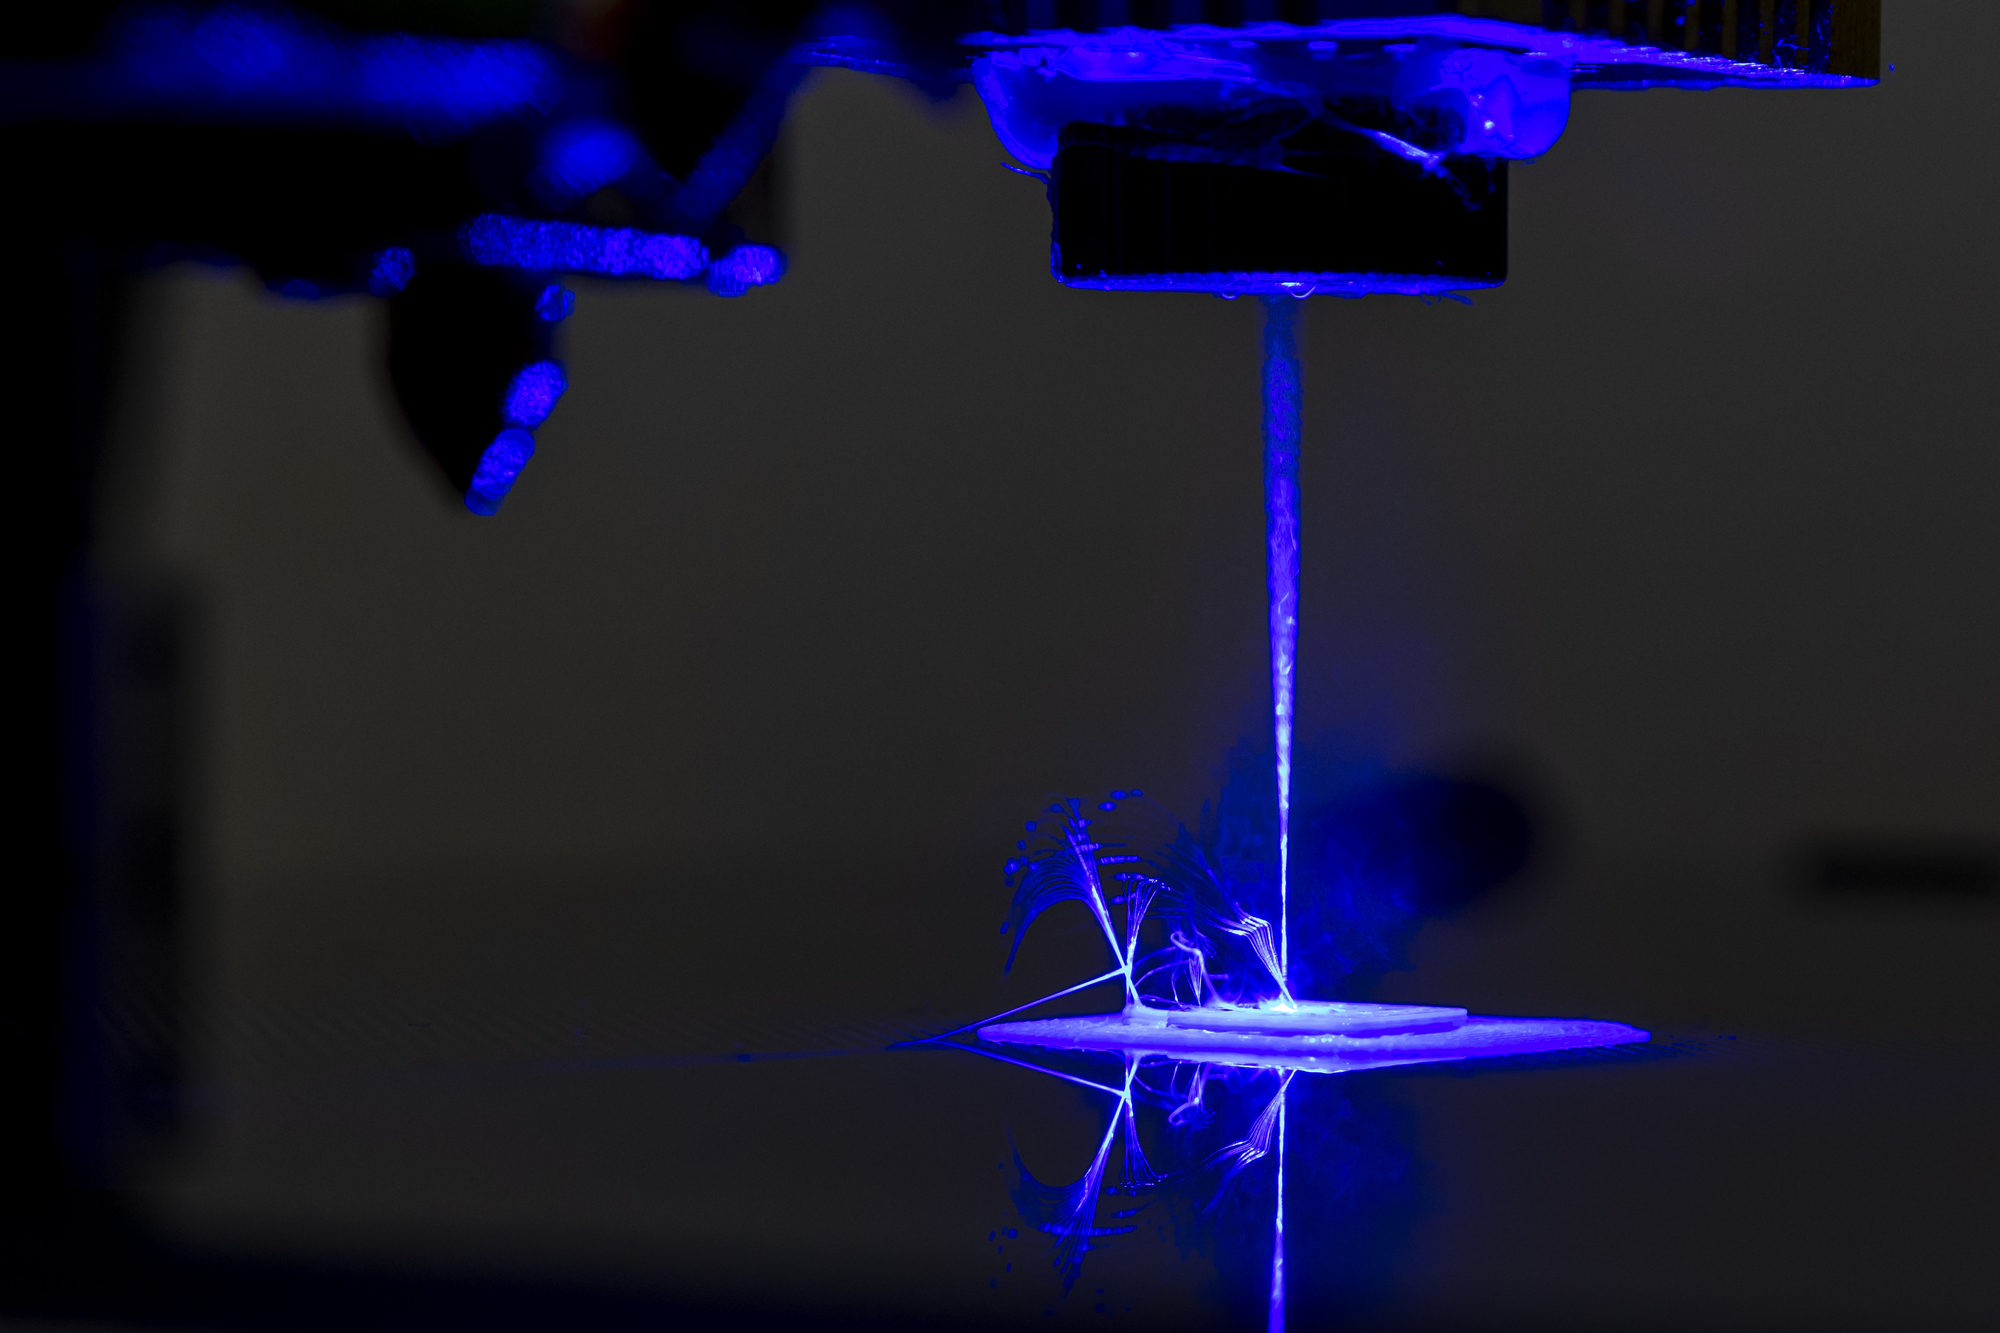 The new 3D printer with laser technology in action